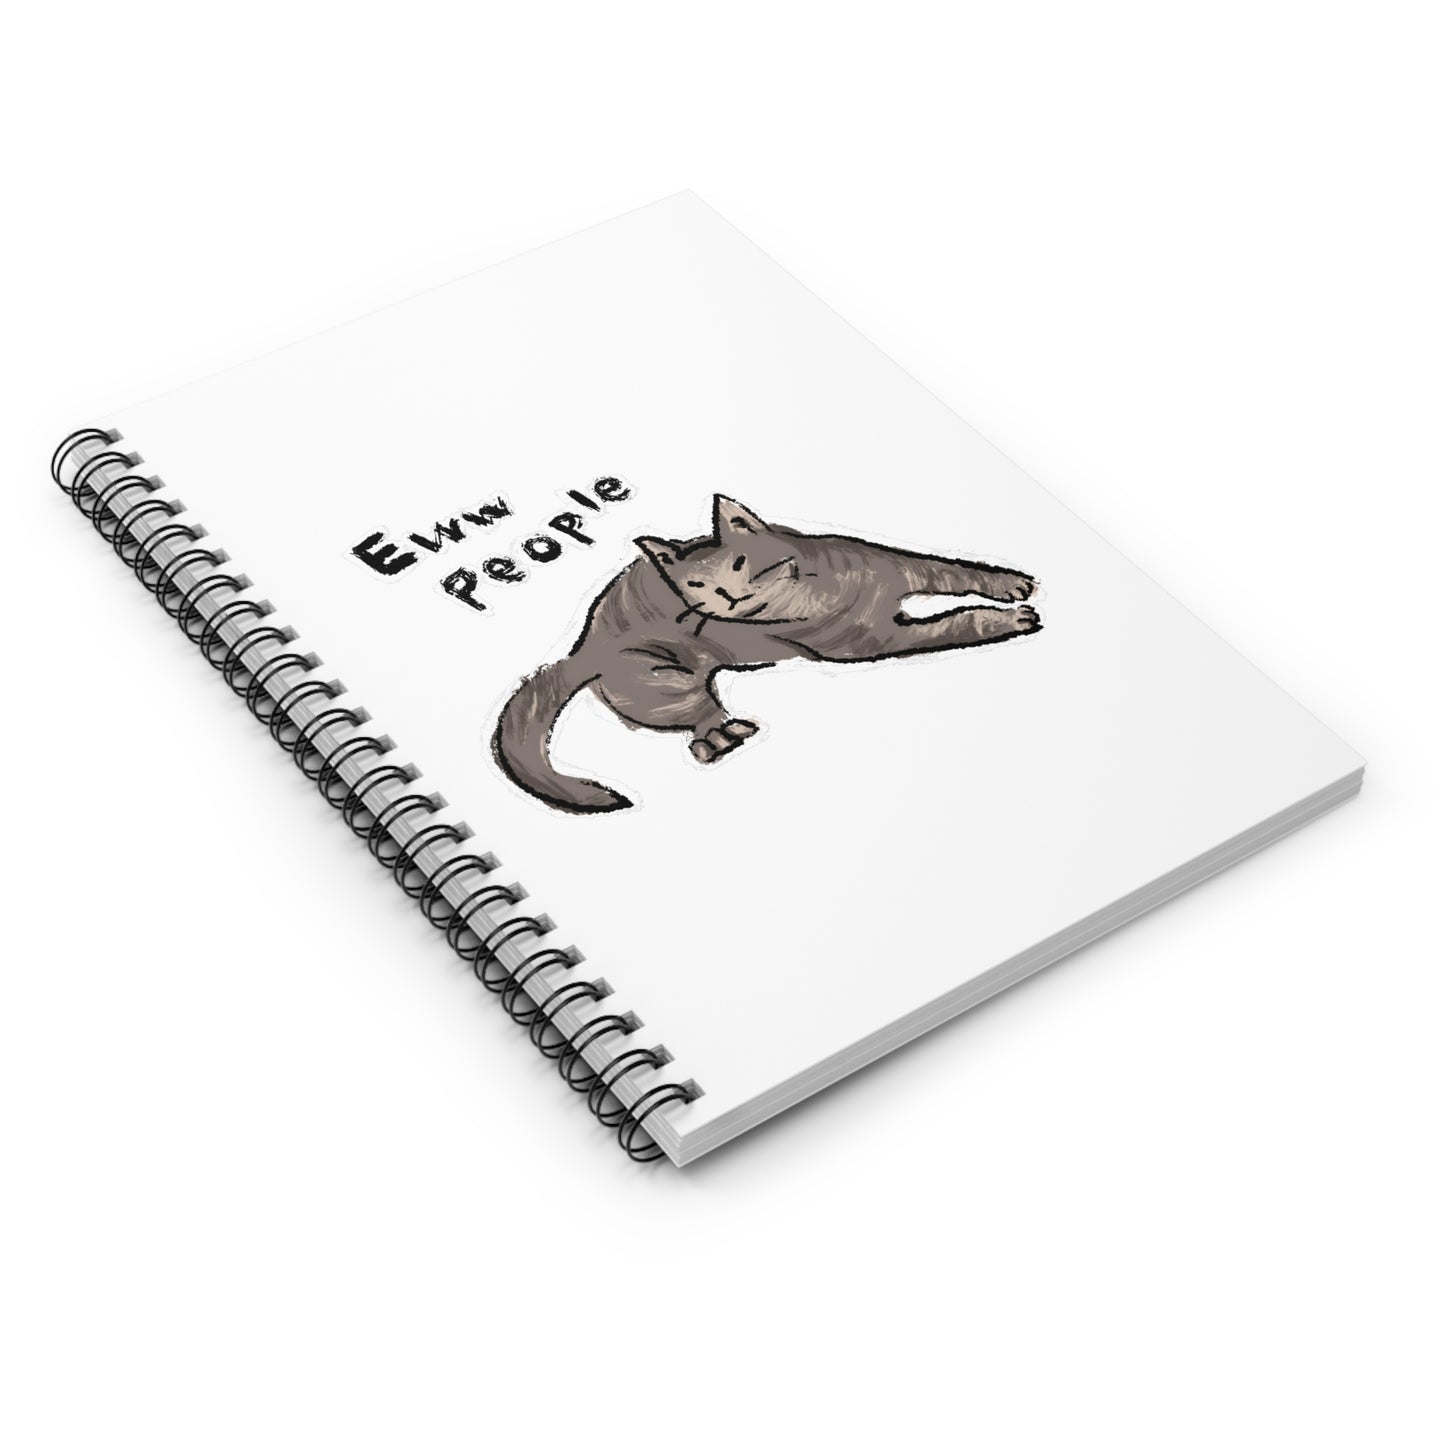 Funny Cat Meme Eww People White Background Spiral Notebook - Ruled Line